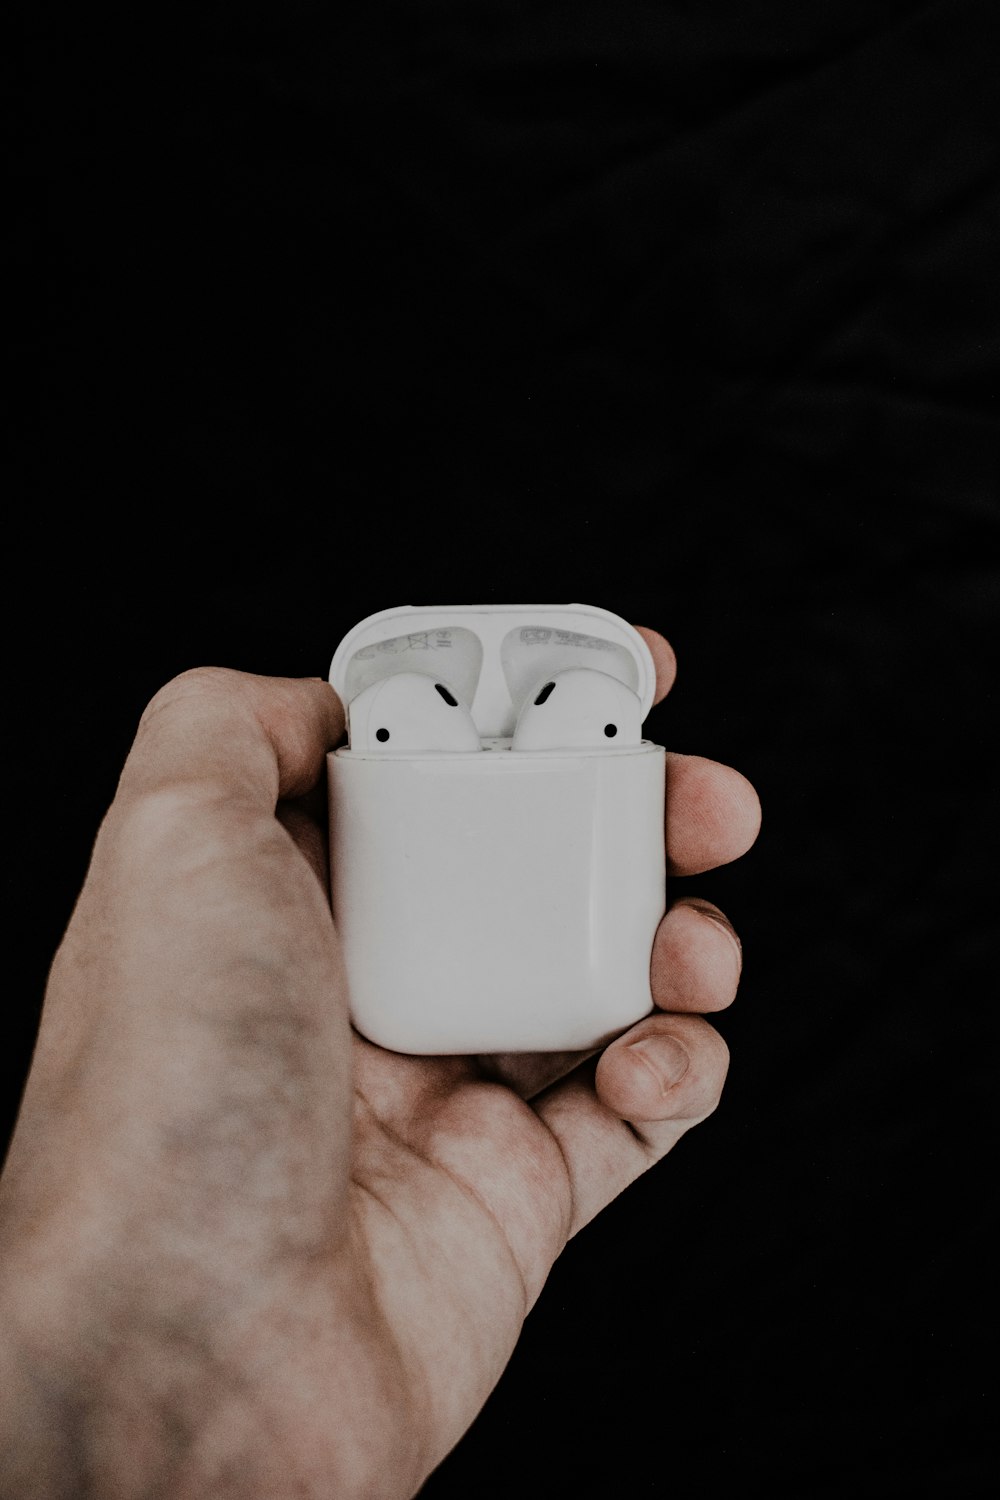 person holding white apple airpods charging case